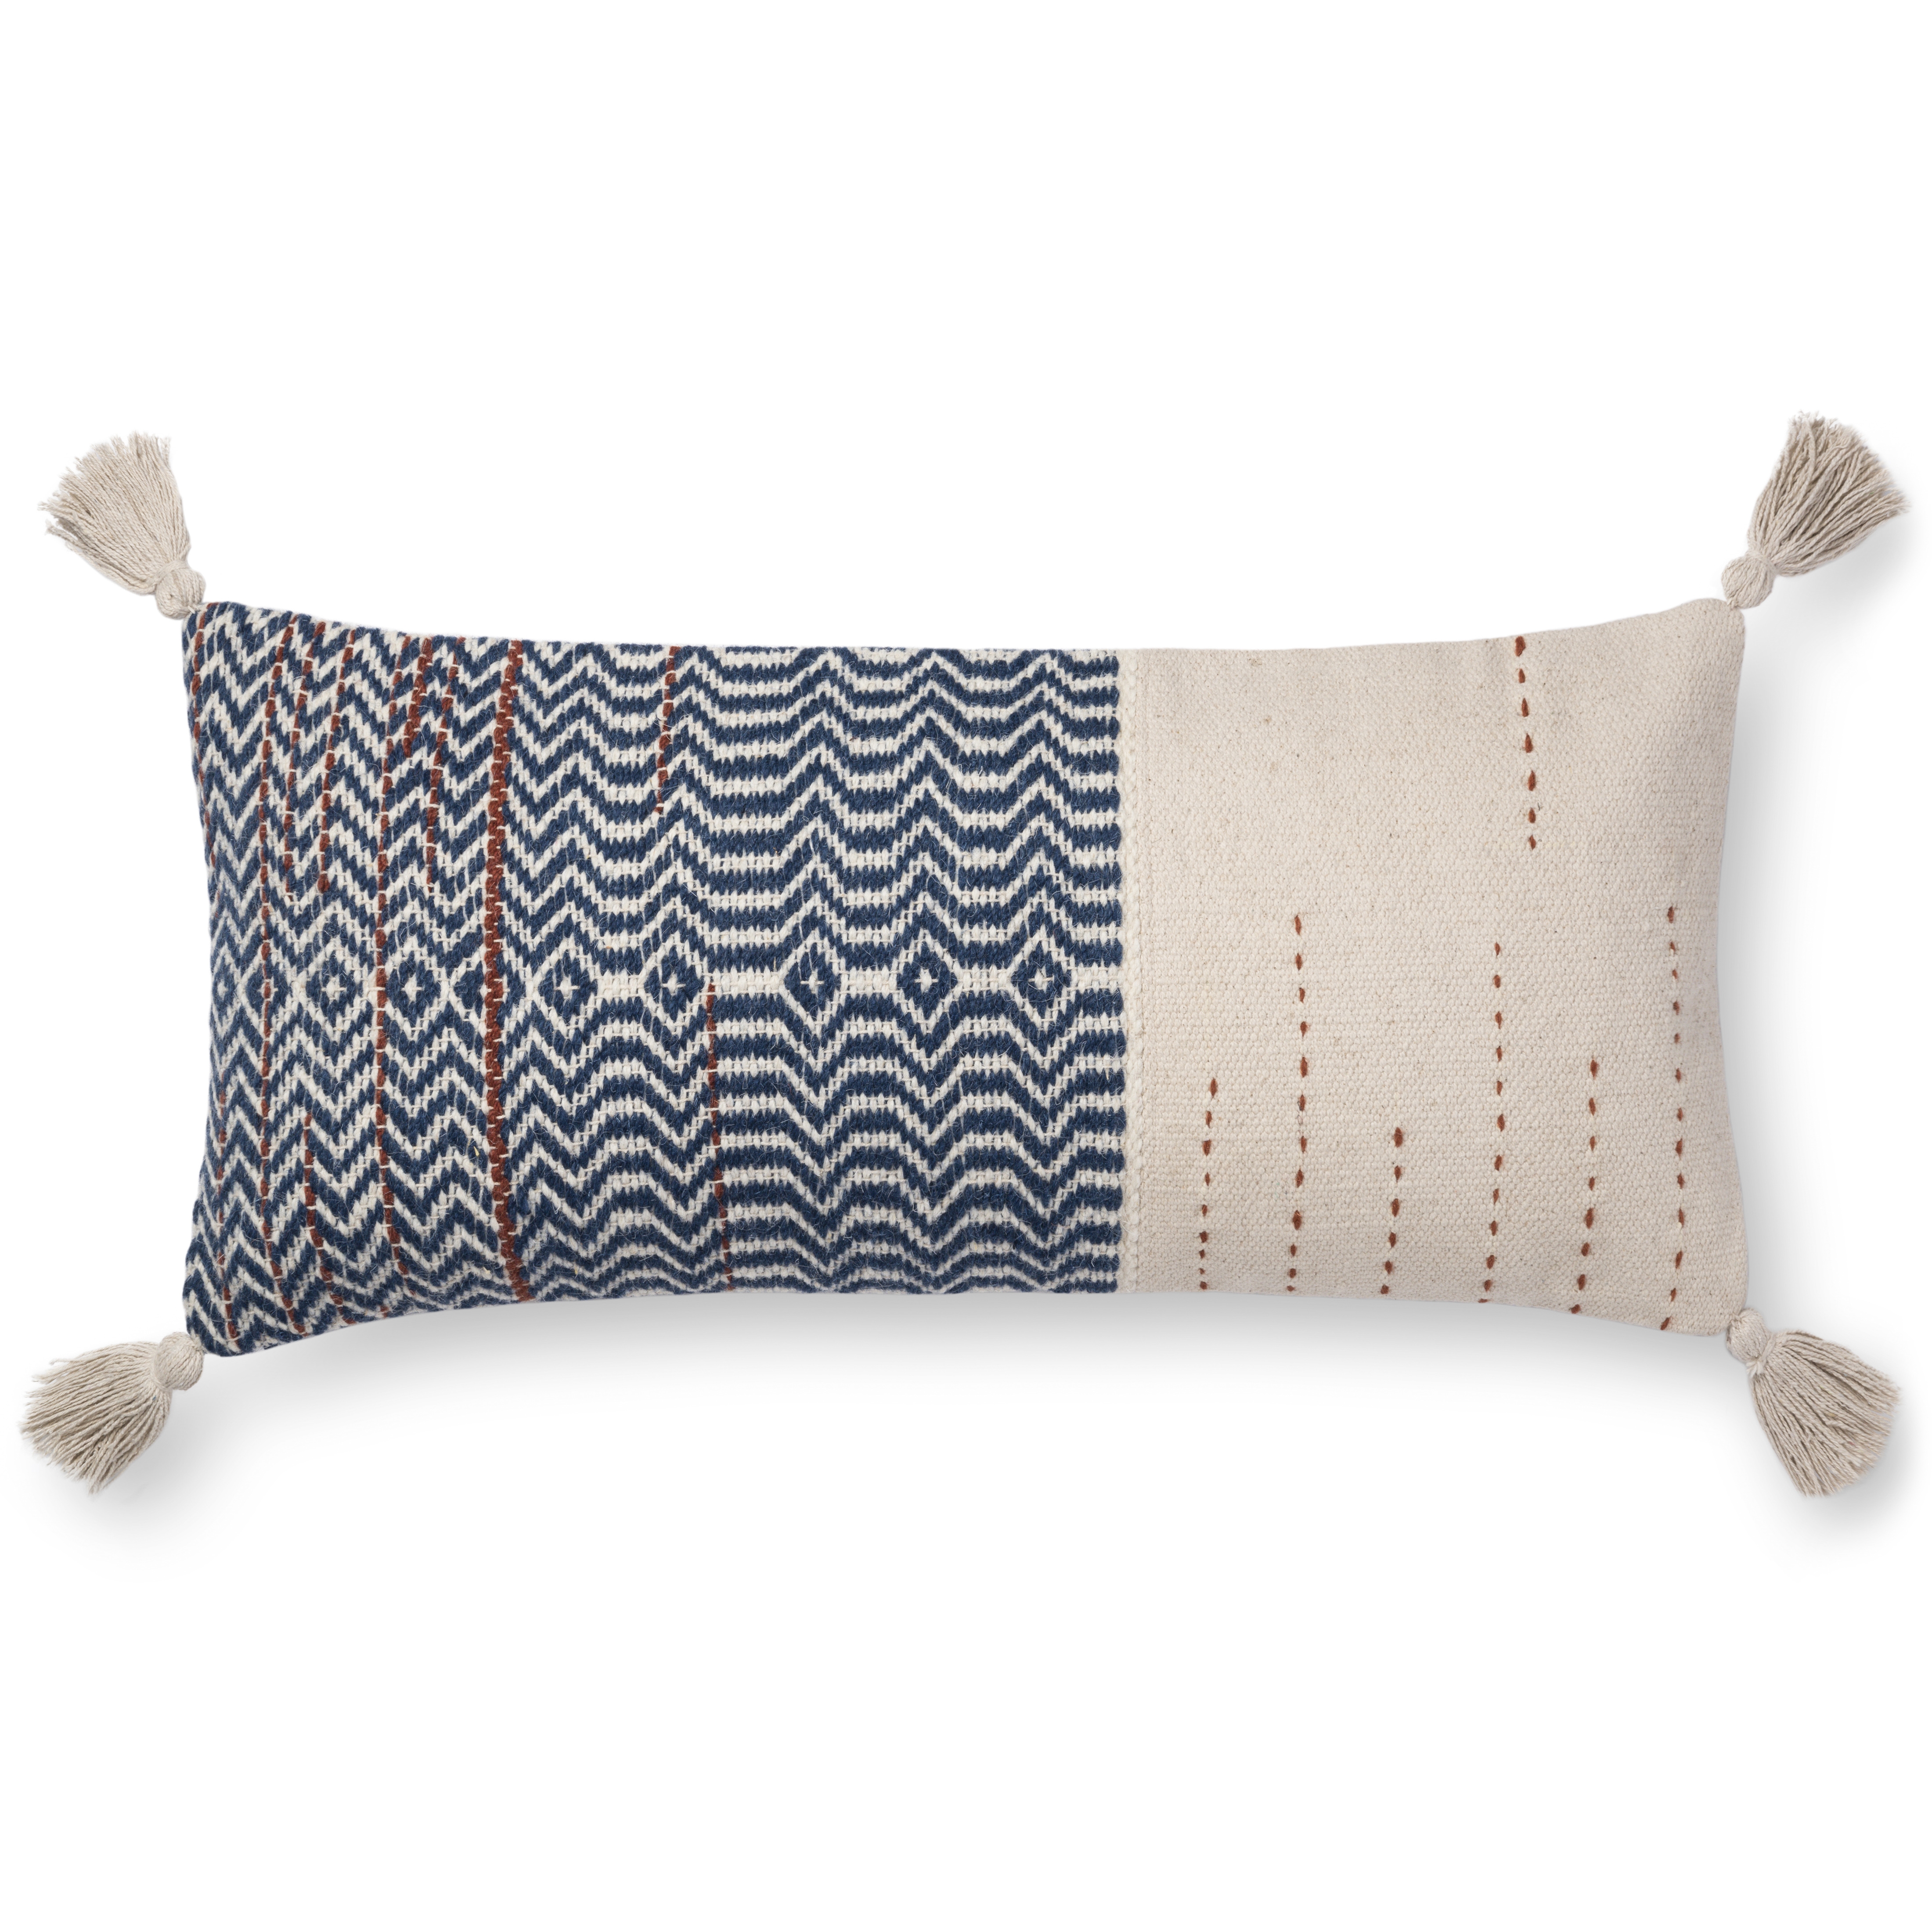 Magnolia Home by Joanna Gaines PILLOWS P1086 IVORY / INDIGO 16" x 26" Cover Only - Image 0